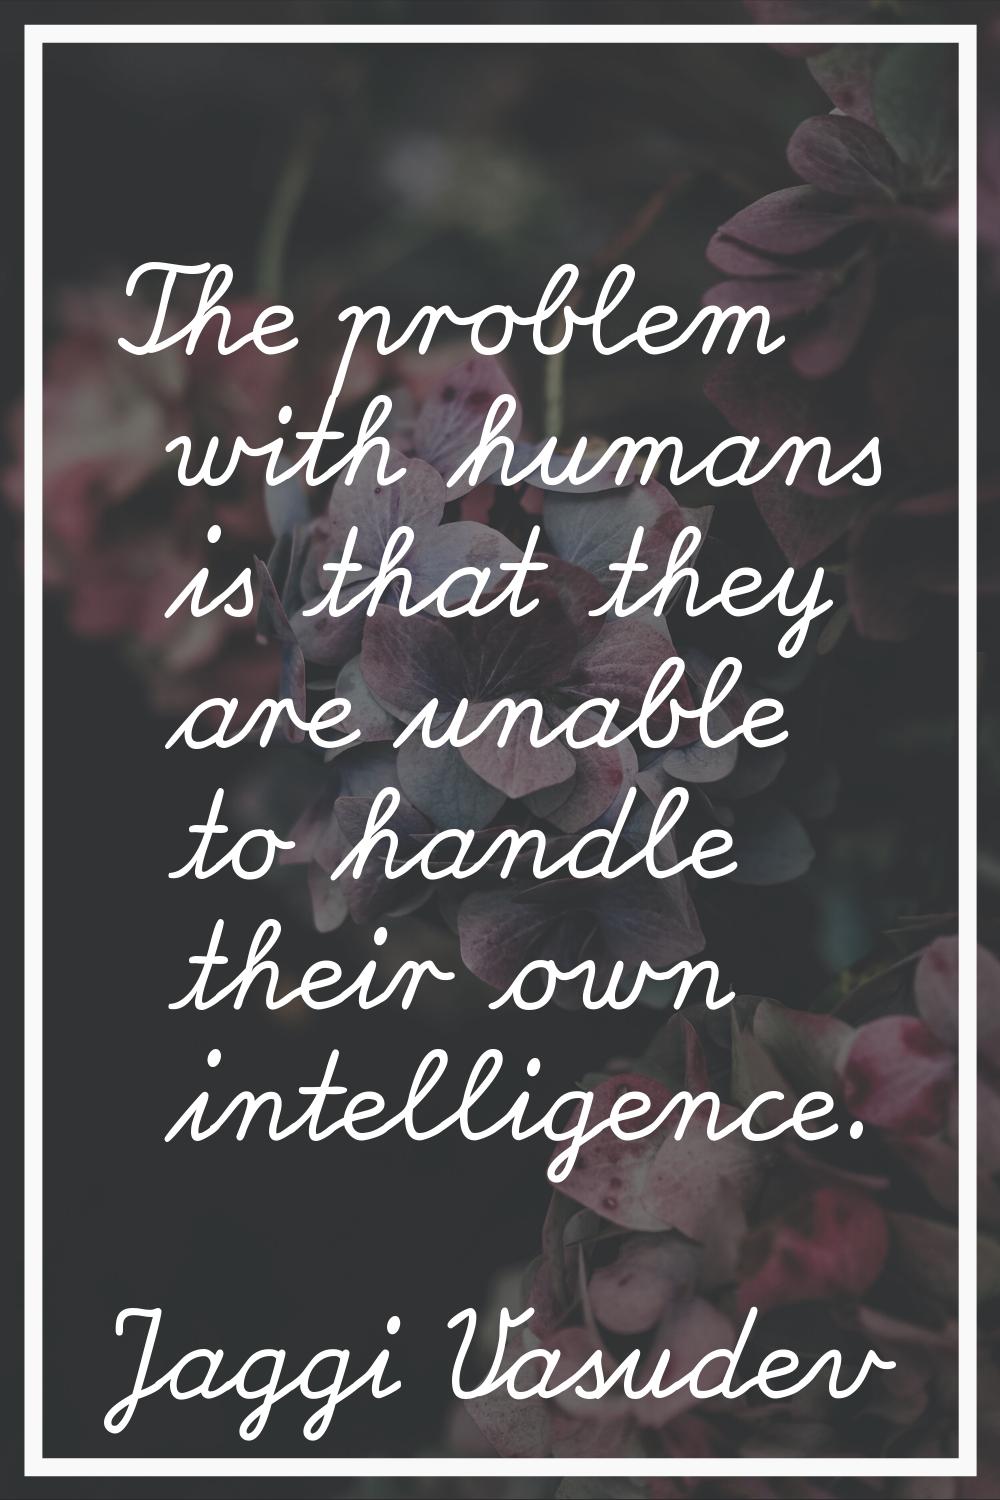 The problem with humans is that they are unable to handle their own intelligence.